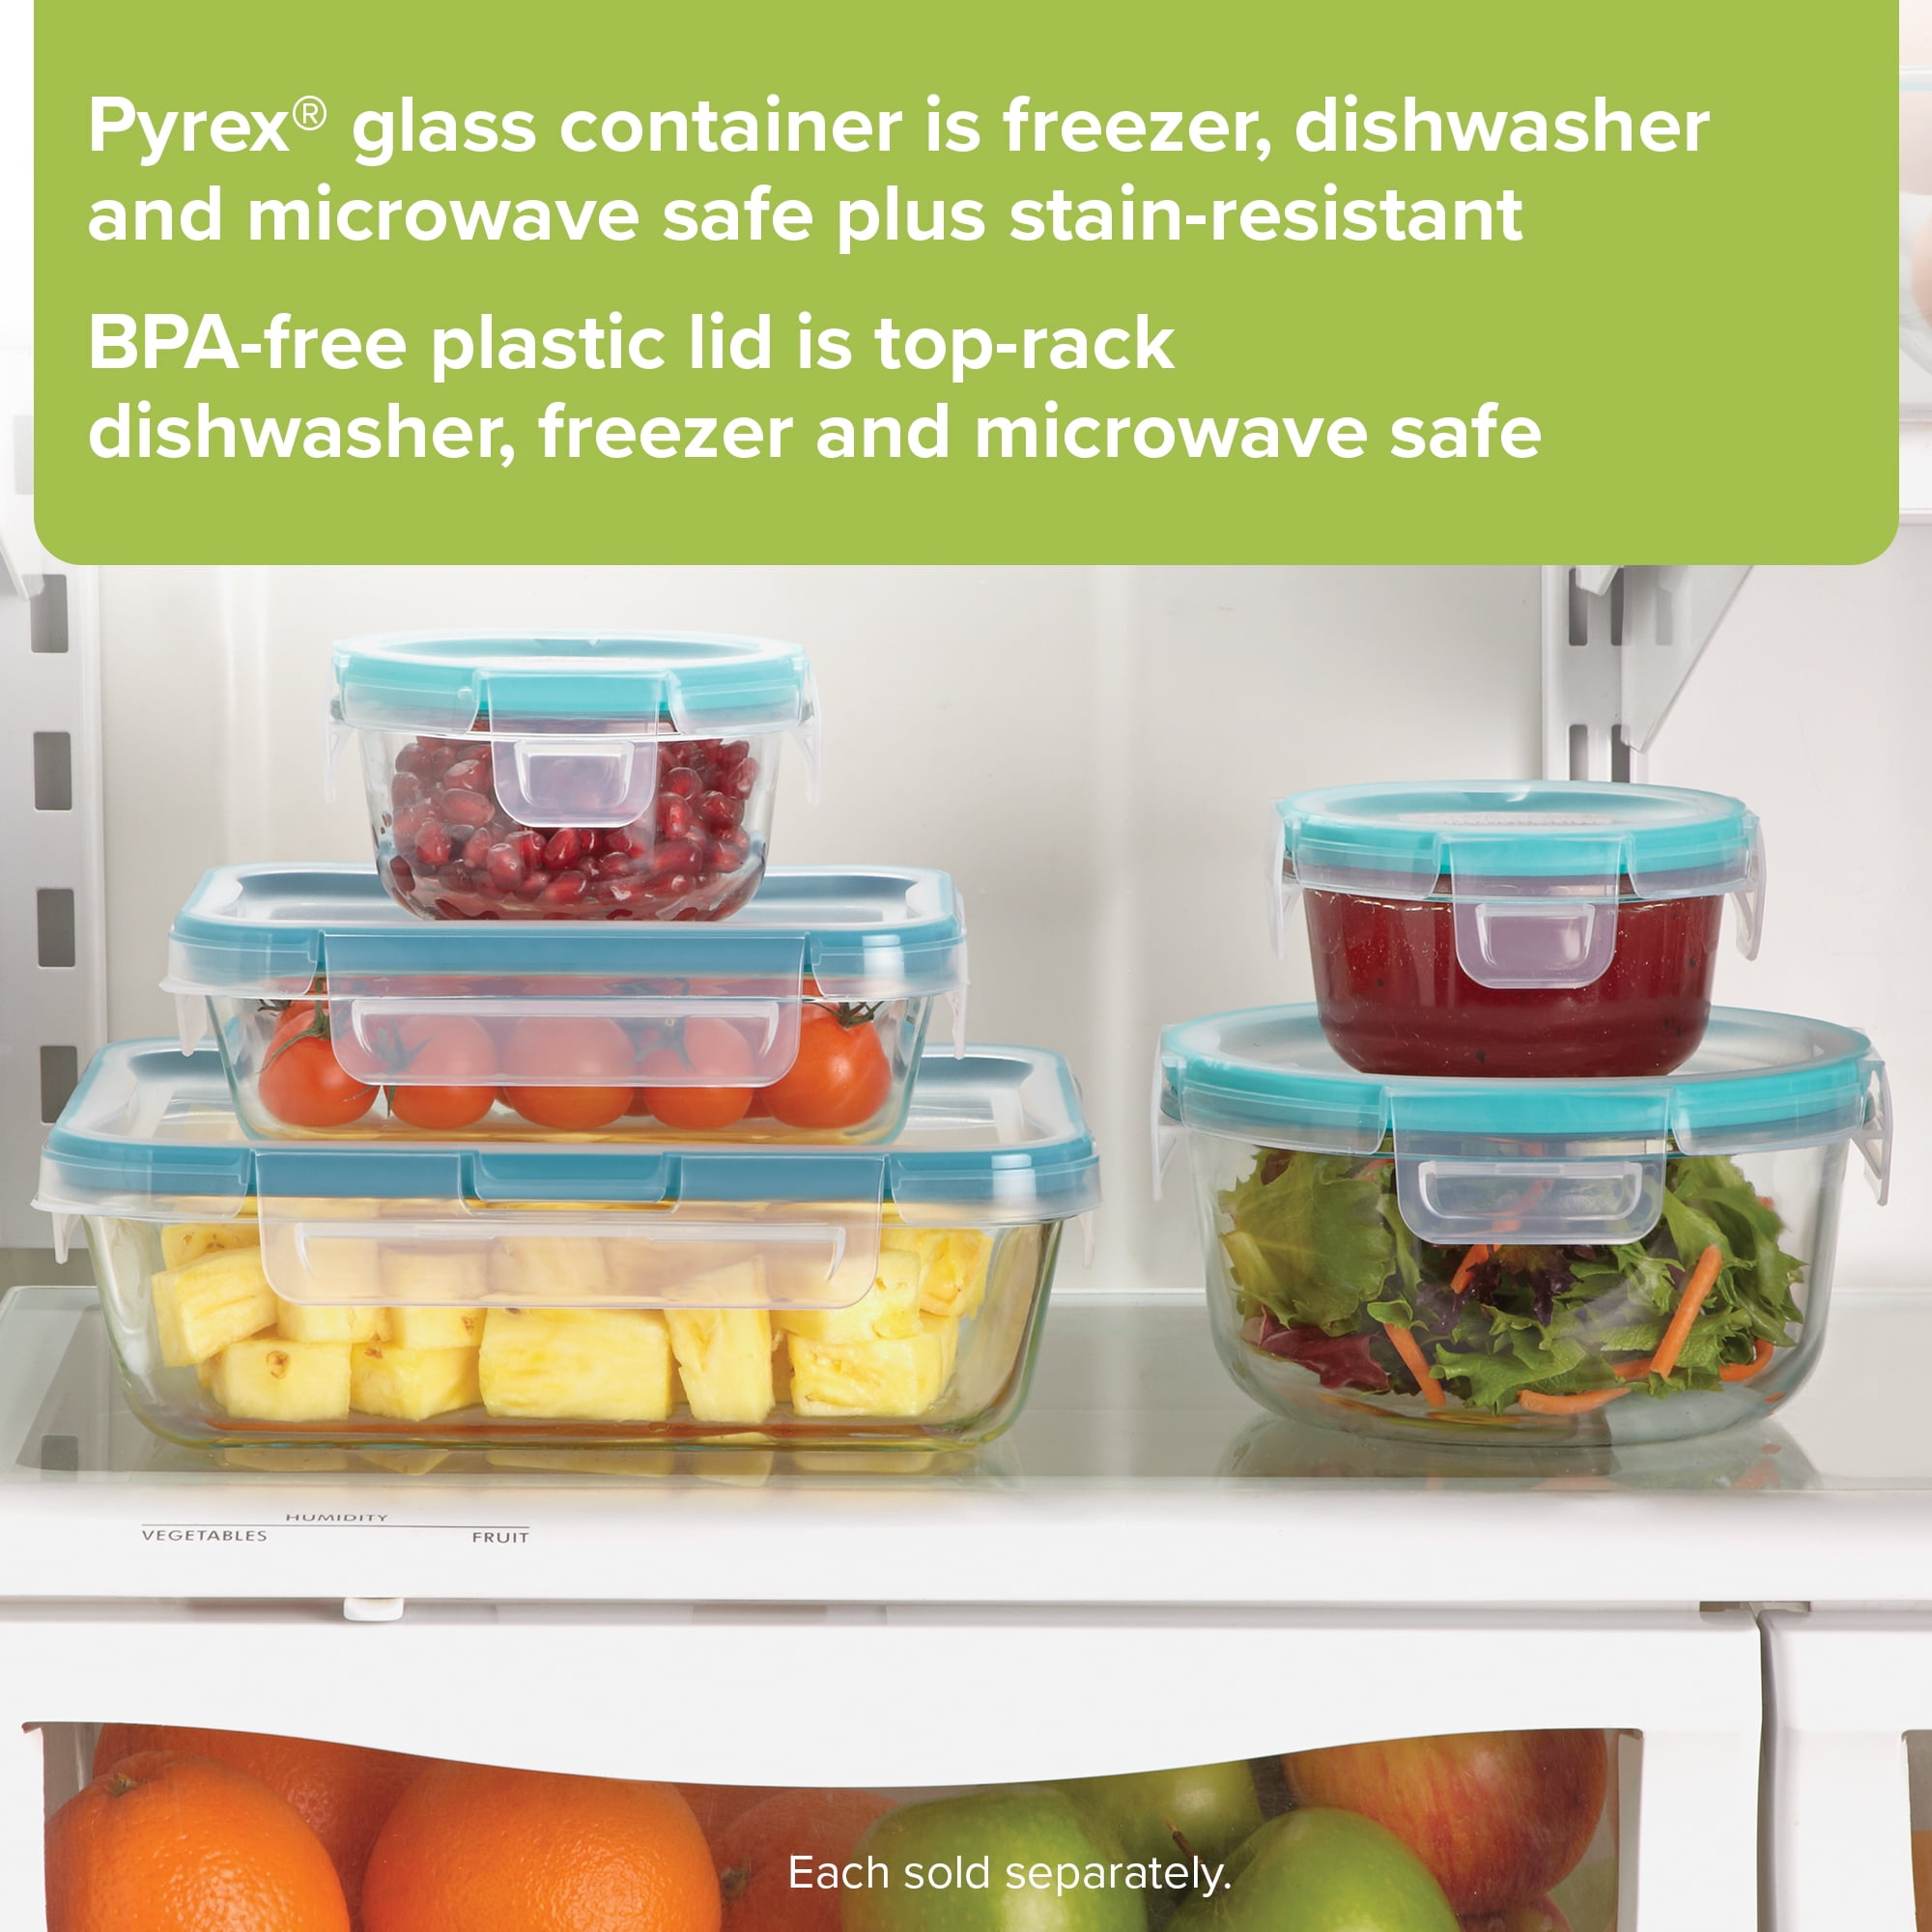  Snapware 4-Piece Total Solution Rectangle Food Storage